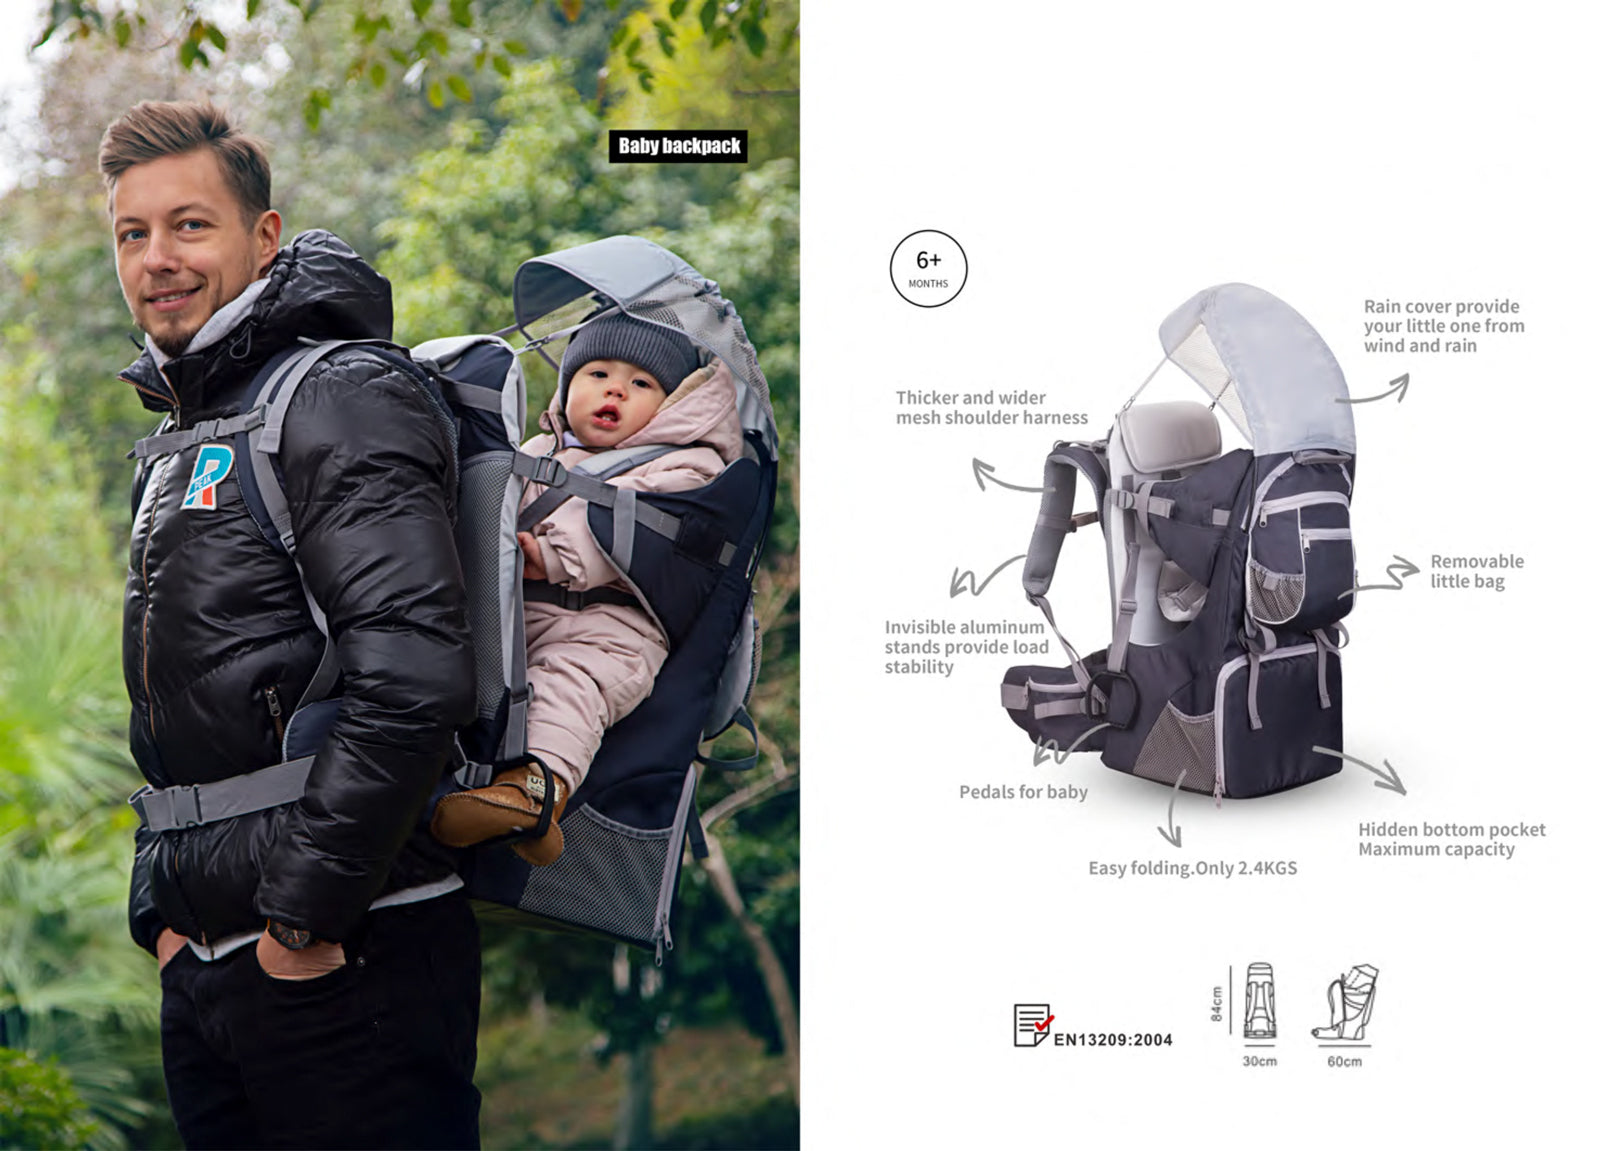 Deluxe Baby Backpack Hiking Child Carrier Lightweight Hiking Camping Child Carrier Backpack